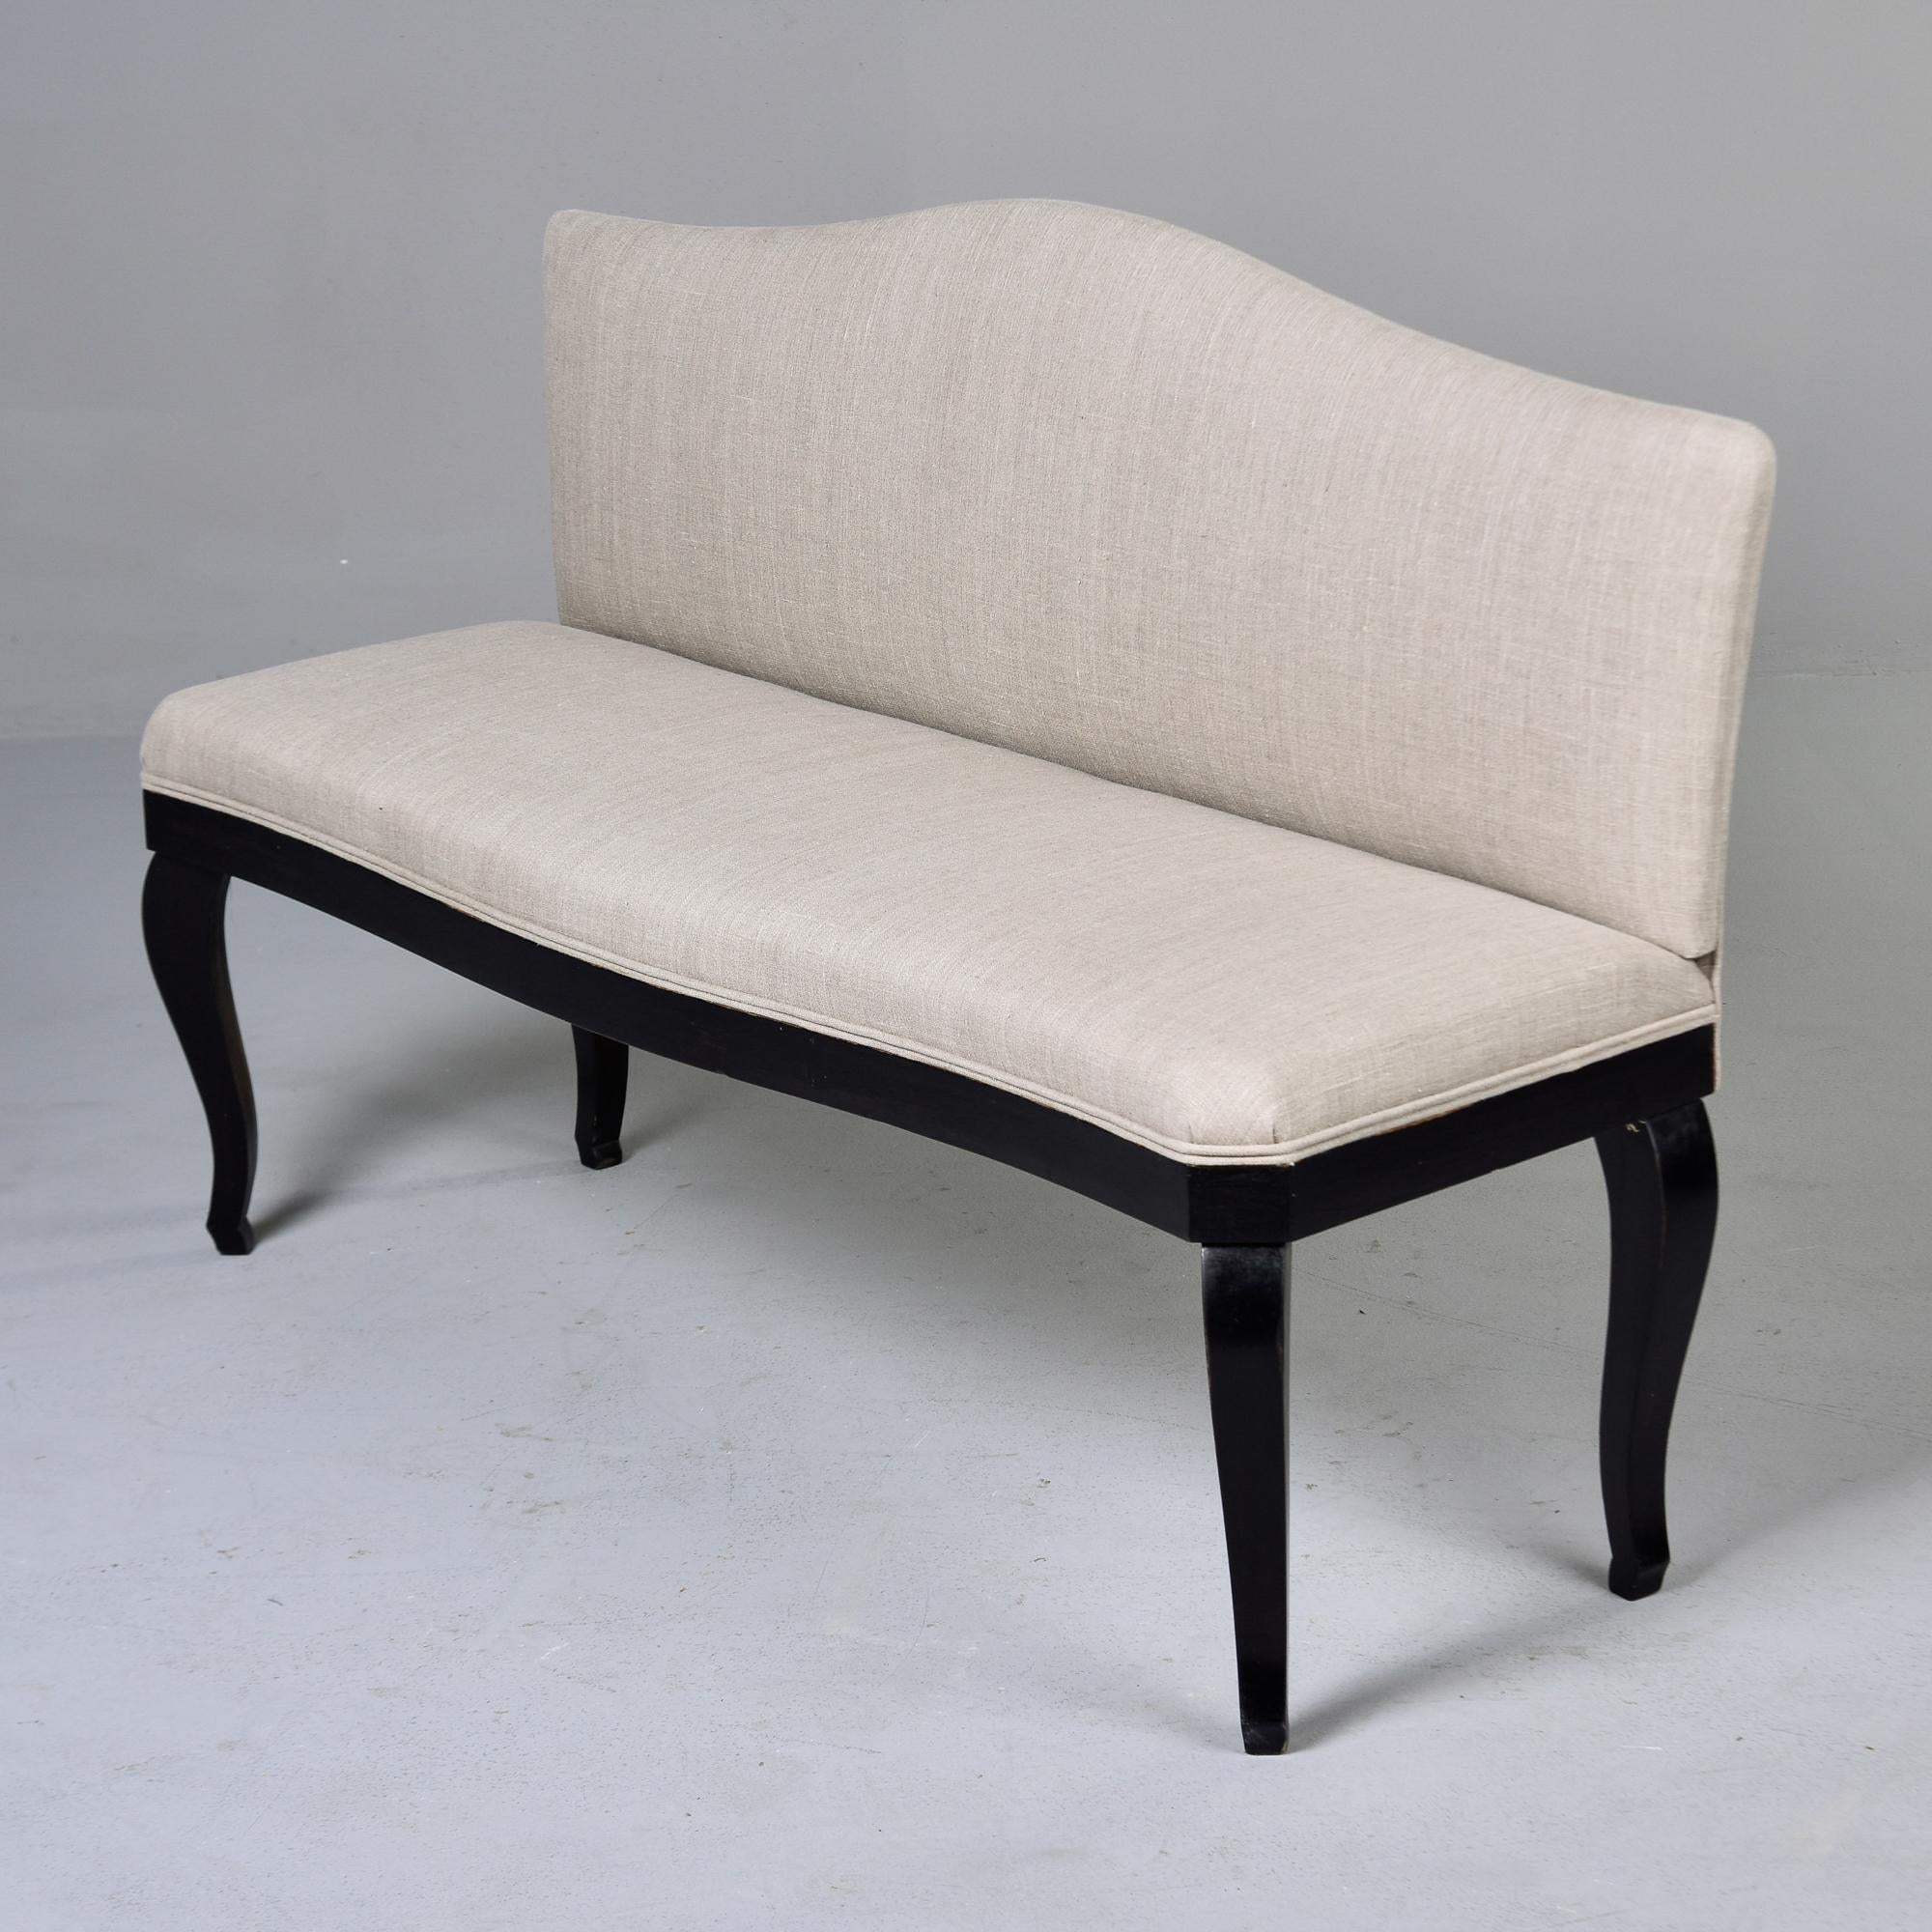 Found in France, this upholstered hall bench dates from the 1920s. Wood base and legs have ebonised finish. Bench was upholstered in natural colored linen by the dealer we acquired it from. Double welt trim along base of seat, camel back . Unknown